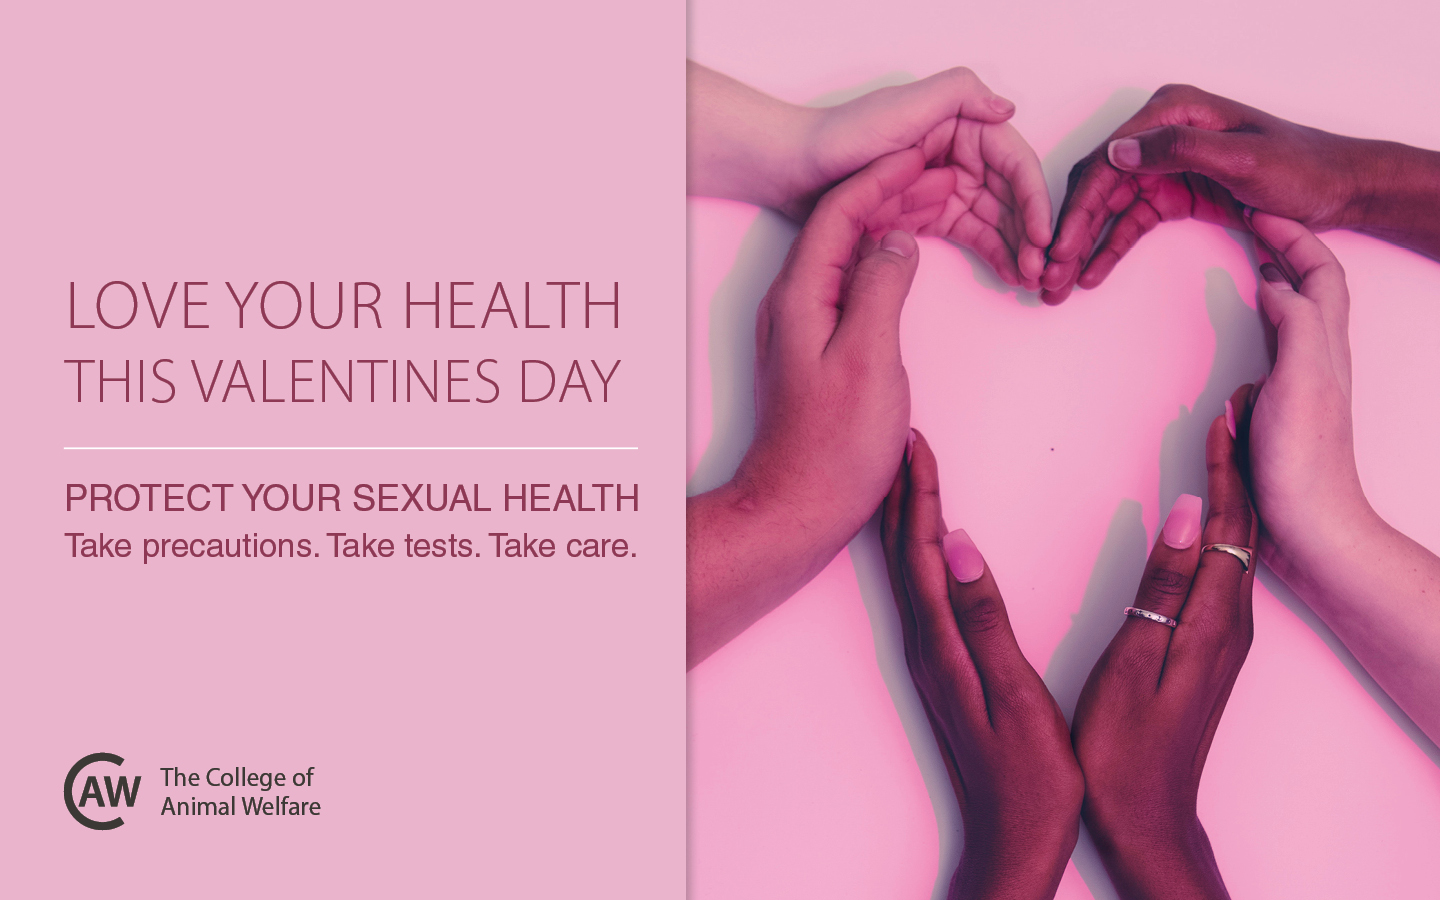 Love your sexual health this Valentine’s Day!